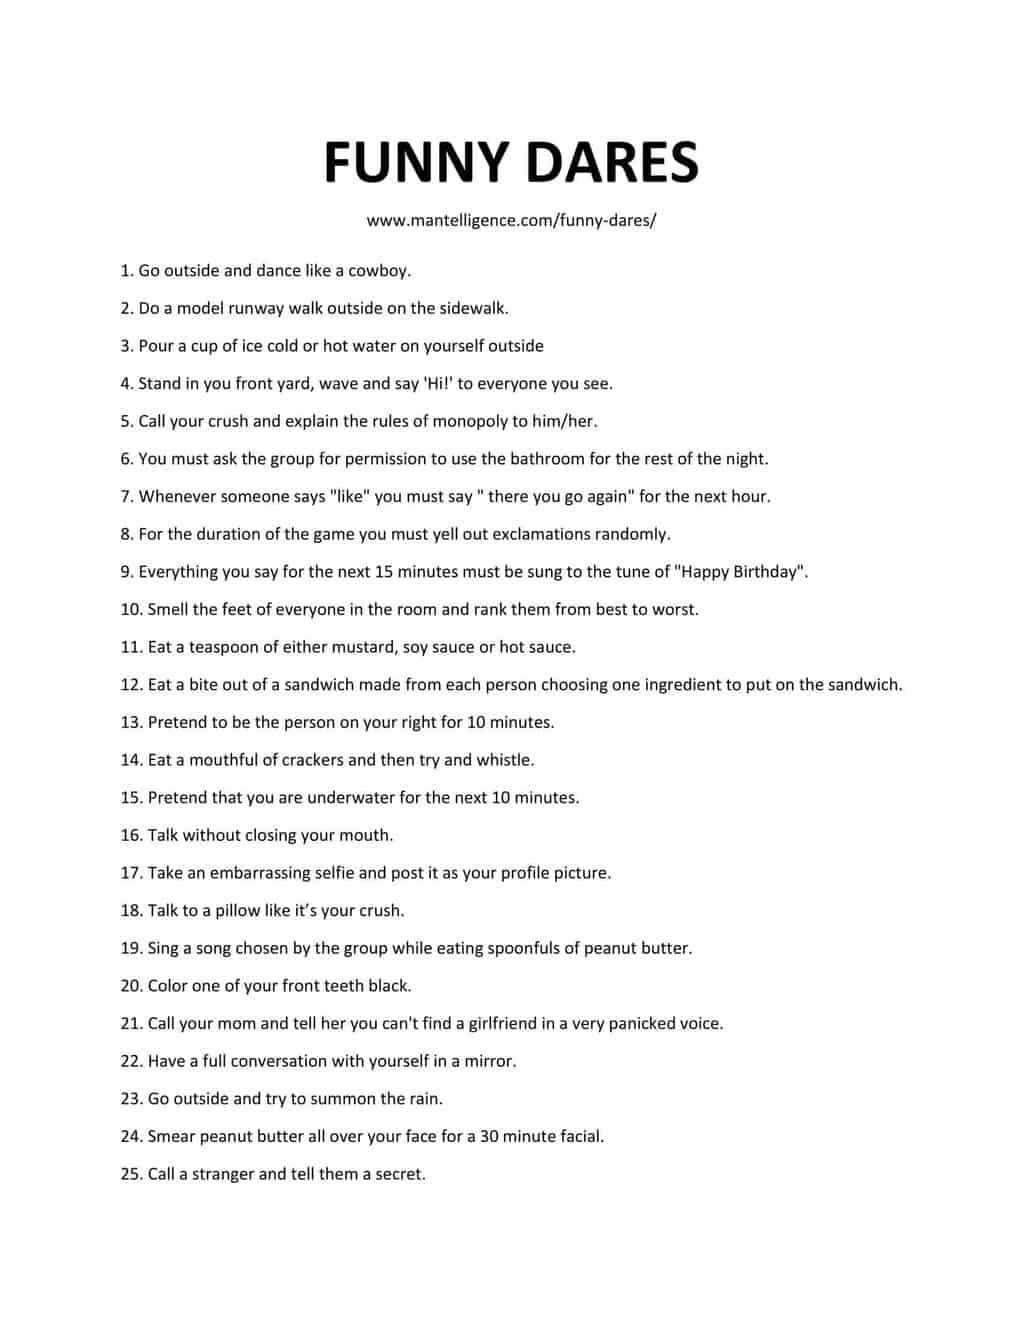 56 Incredibly Funny Dares - The only 